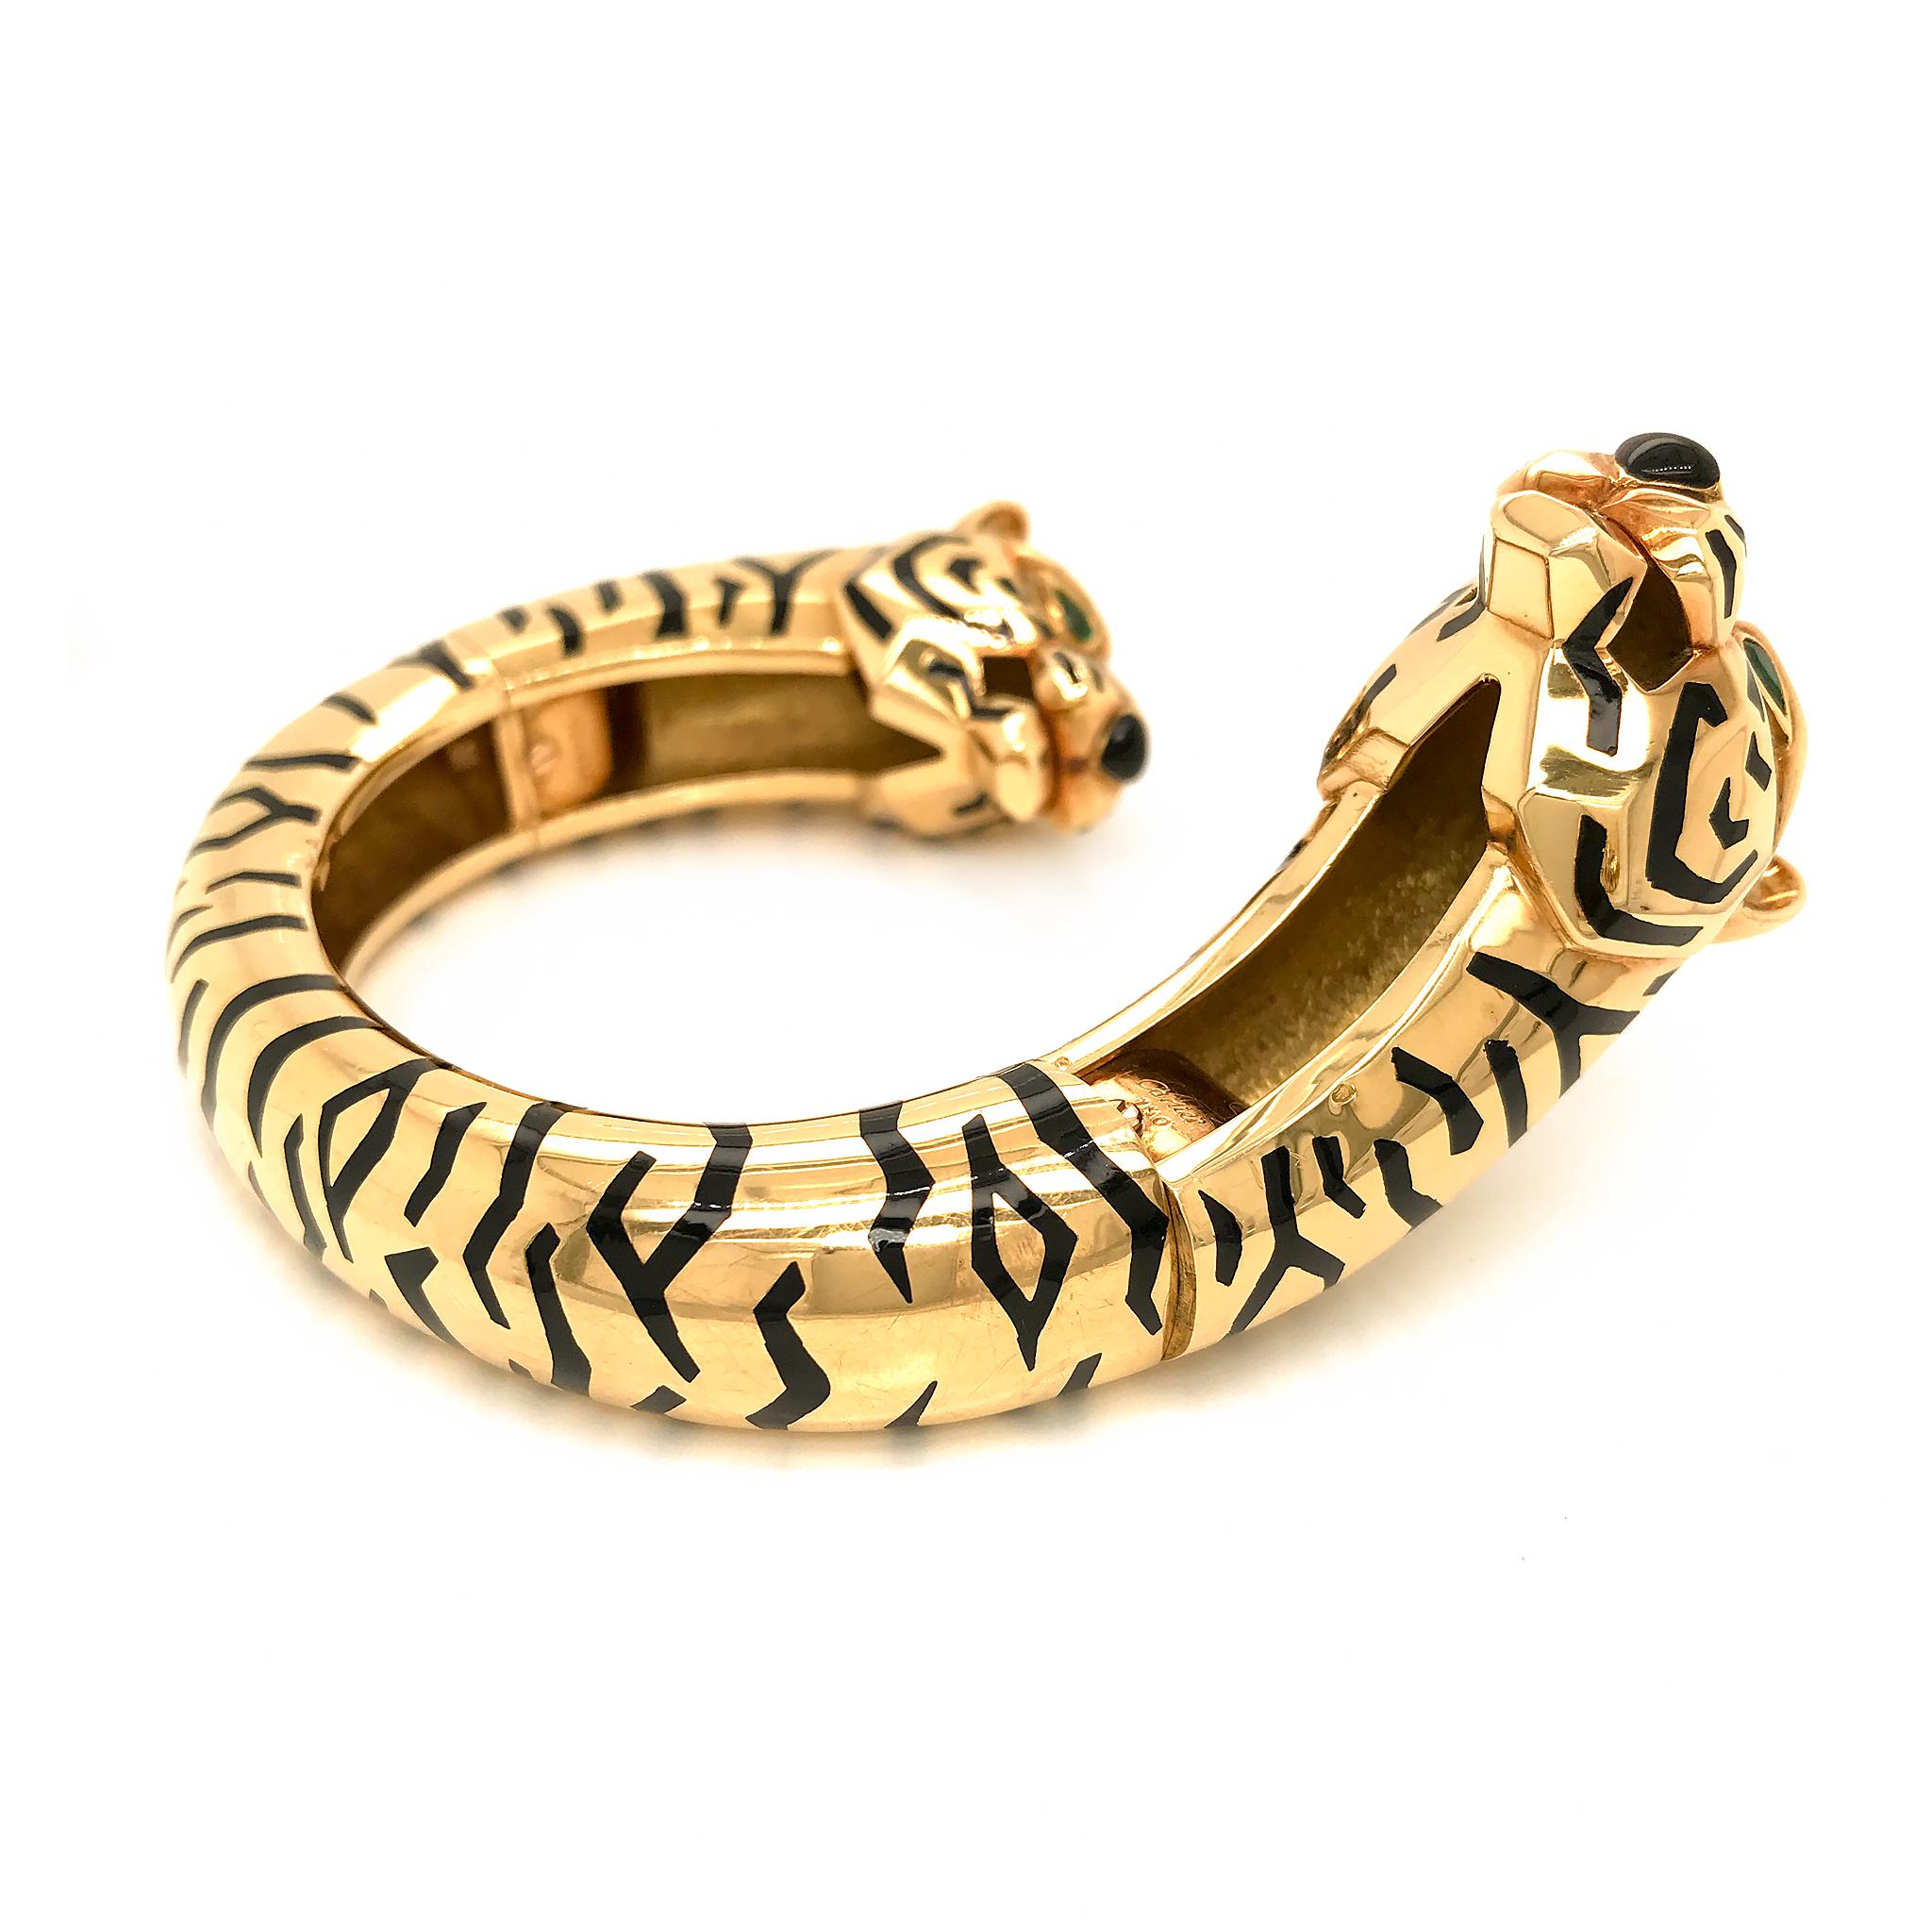 Cartier's famous panther bracelet is a must-have for jewelery.
As early as the year 1918, Jeanne Toussaint, creator at Cartier, made it the founding myth of the jeweler, it is inseparable from the
Cartier House.

Here for sale the opposing panther